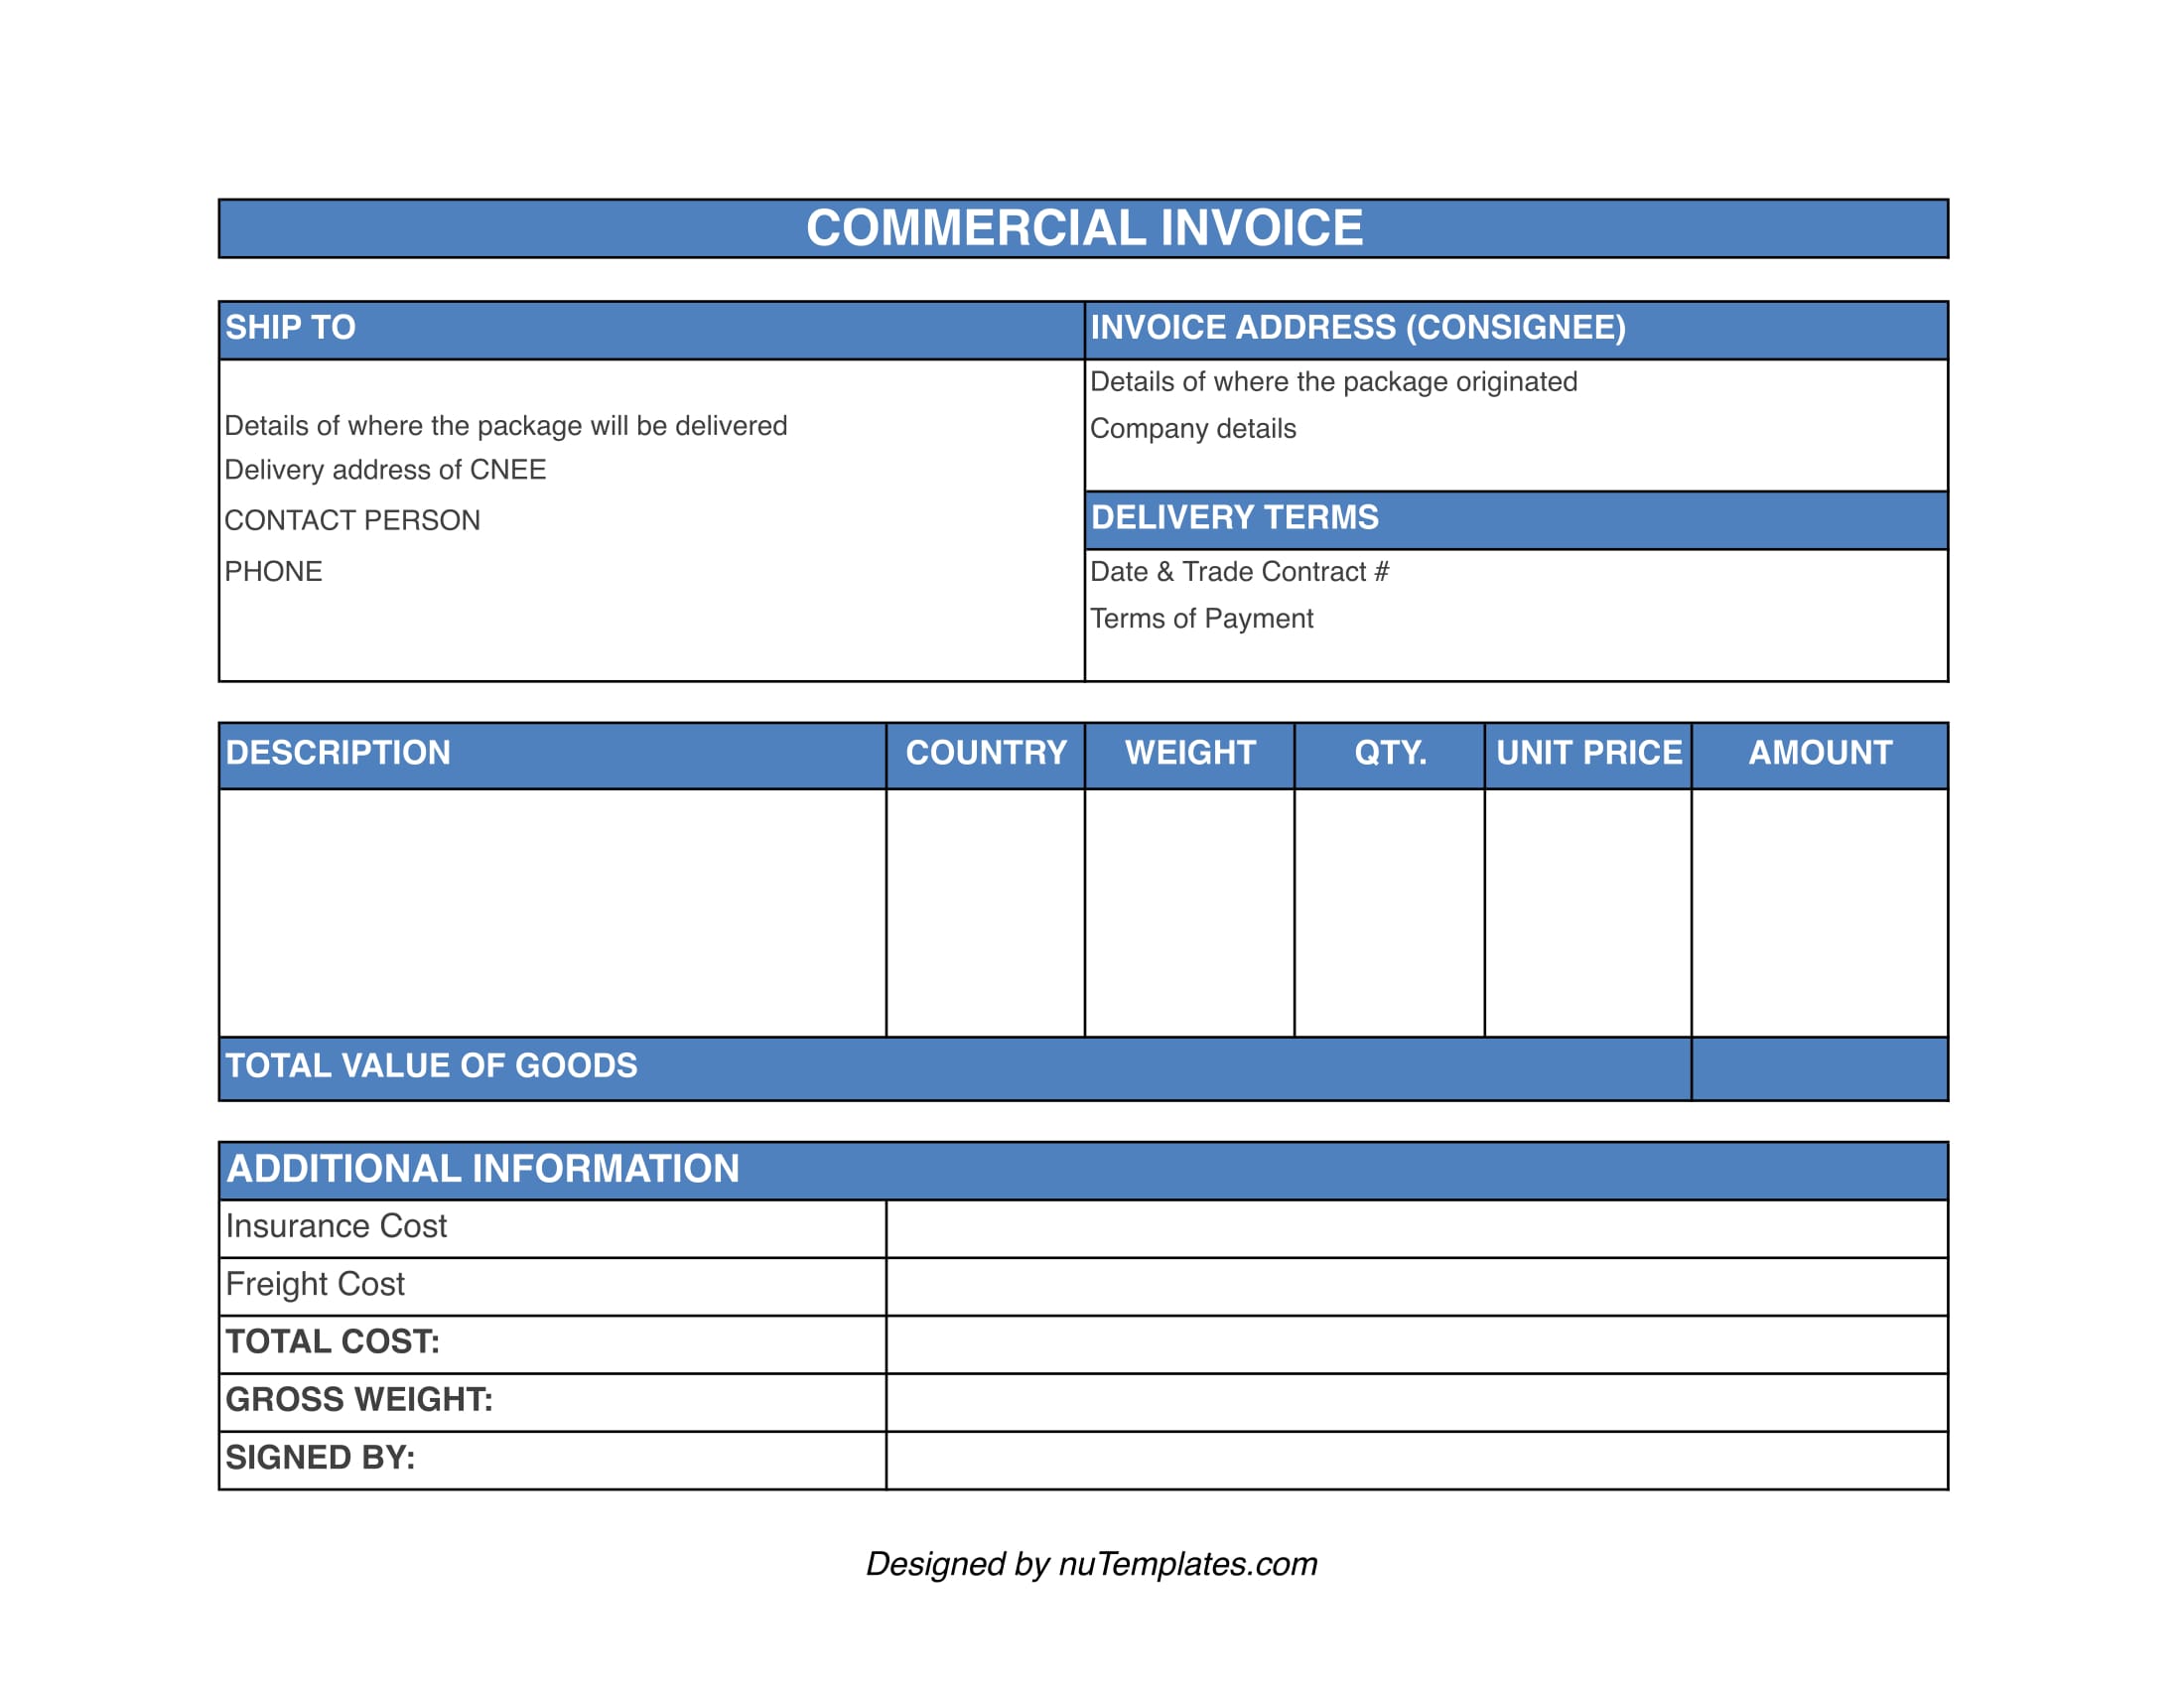 Commercial Invoice Template Commercial Invoices nuTemplates